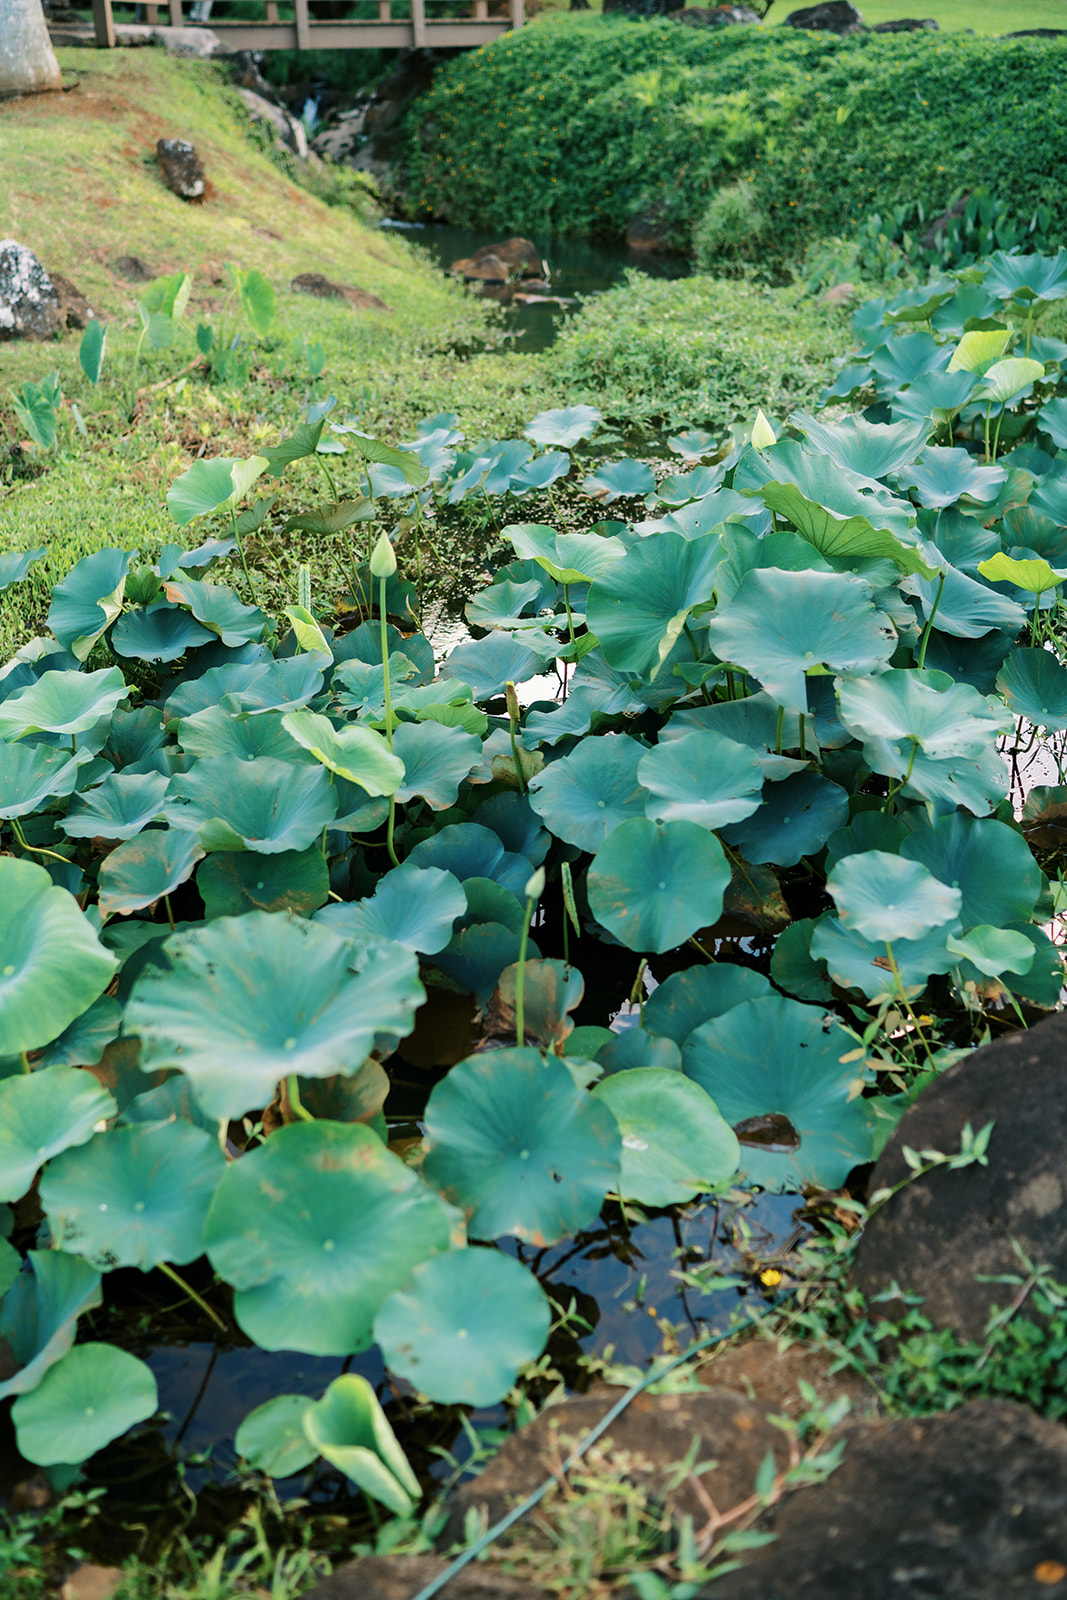 Pond with lush green lotus leaves and a flowering bud, set against a backdrop of rocks and greenery.